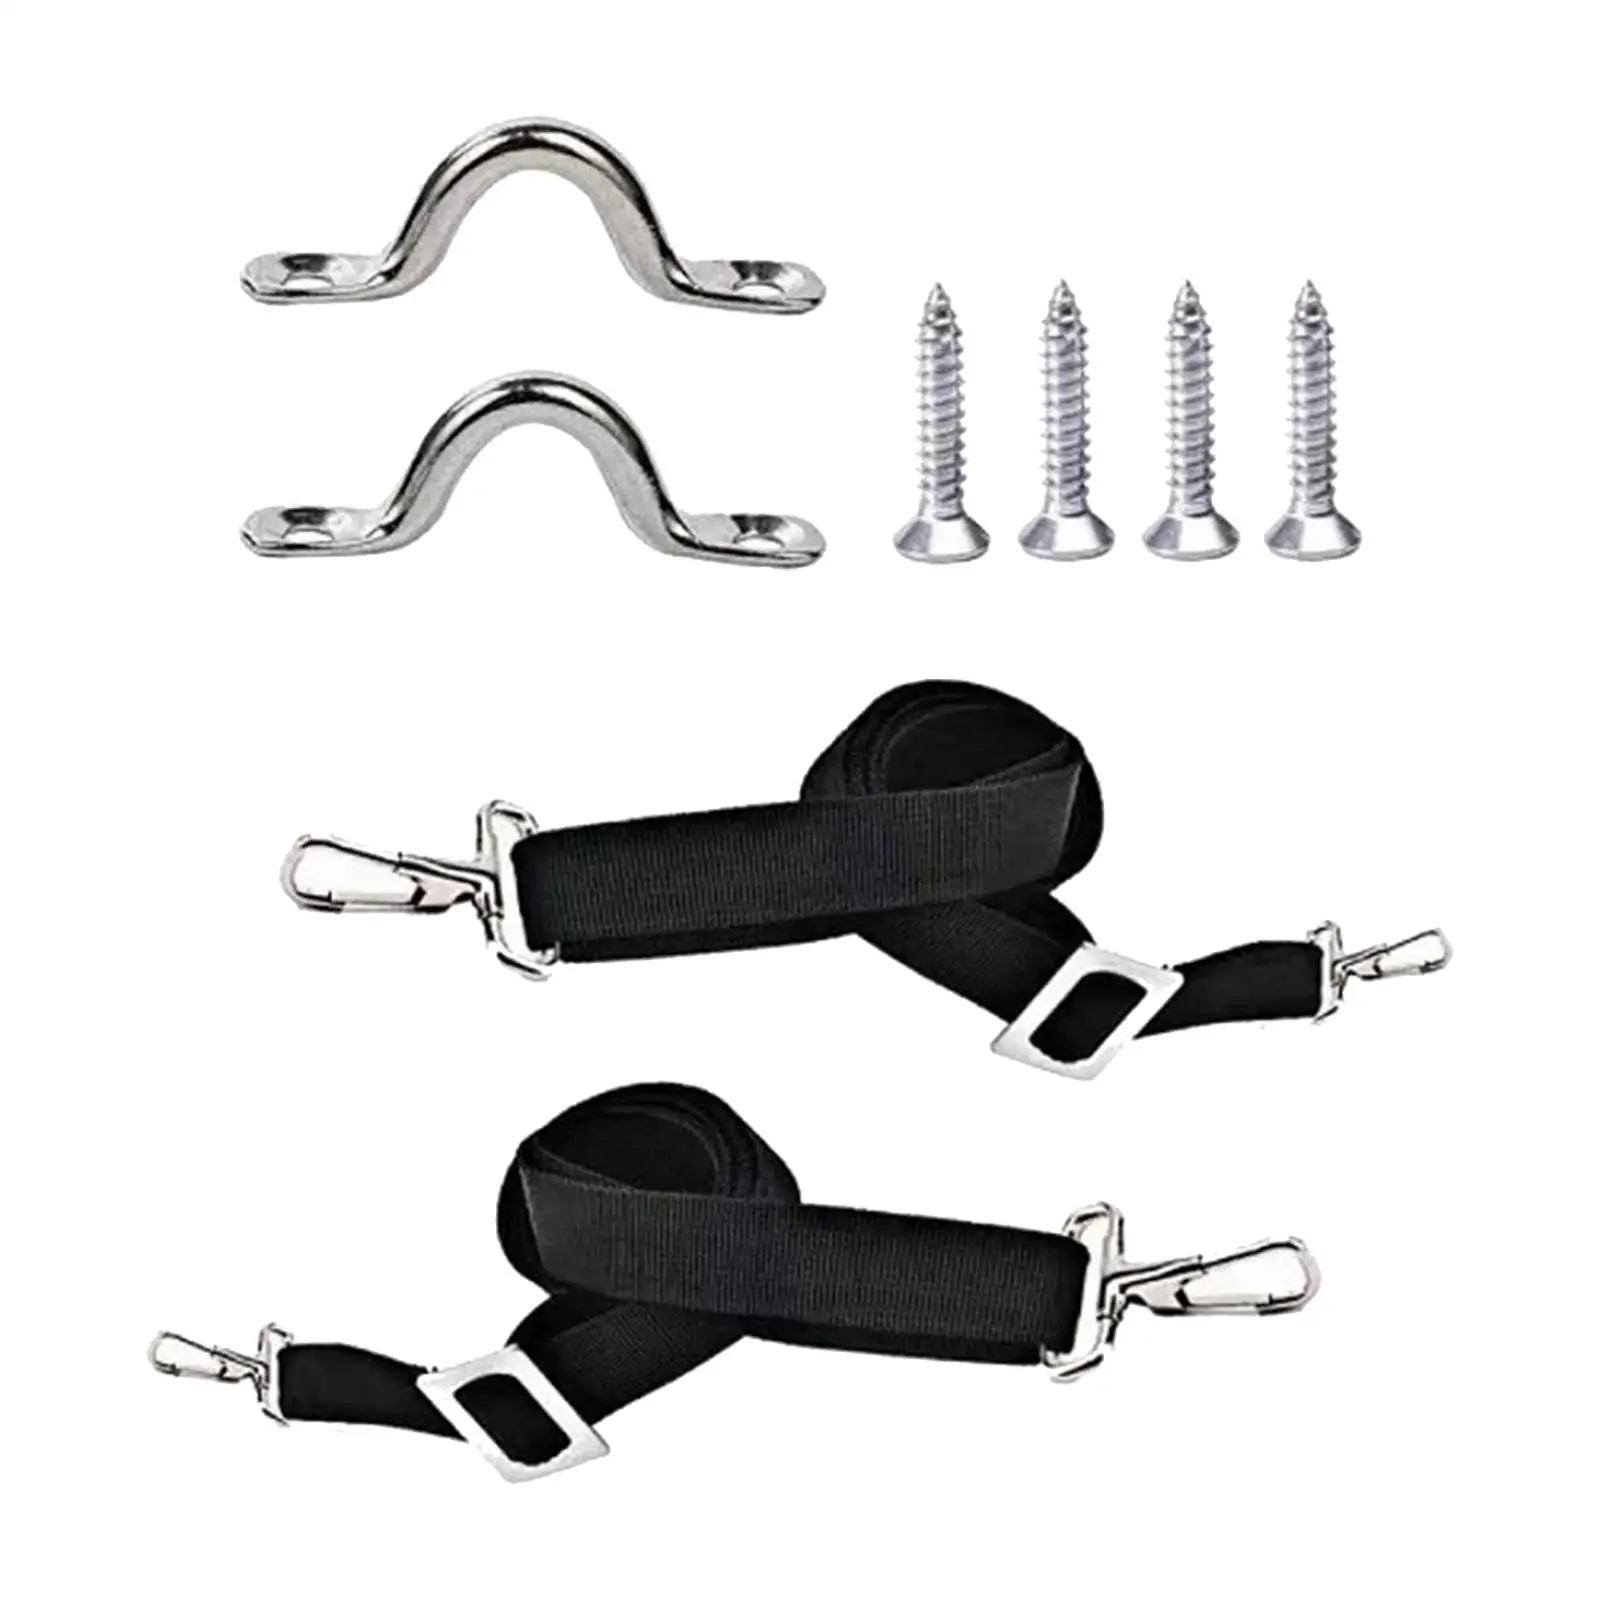 

2x Adjustable Bimini Top Straps Pad Eye Straps W/ Loops and Hook 28"~60" Nylon Boat Top Straps for Ship Boat Canoe